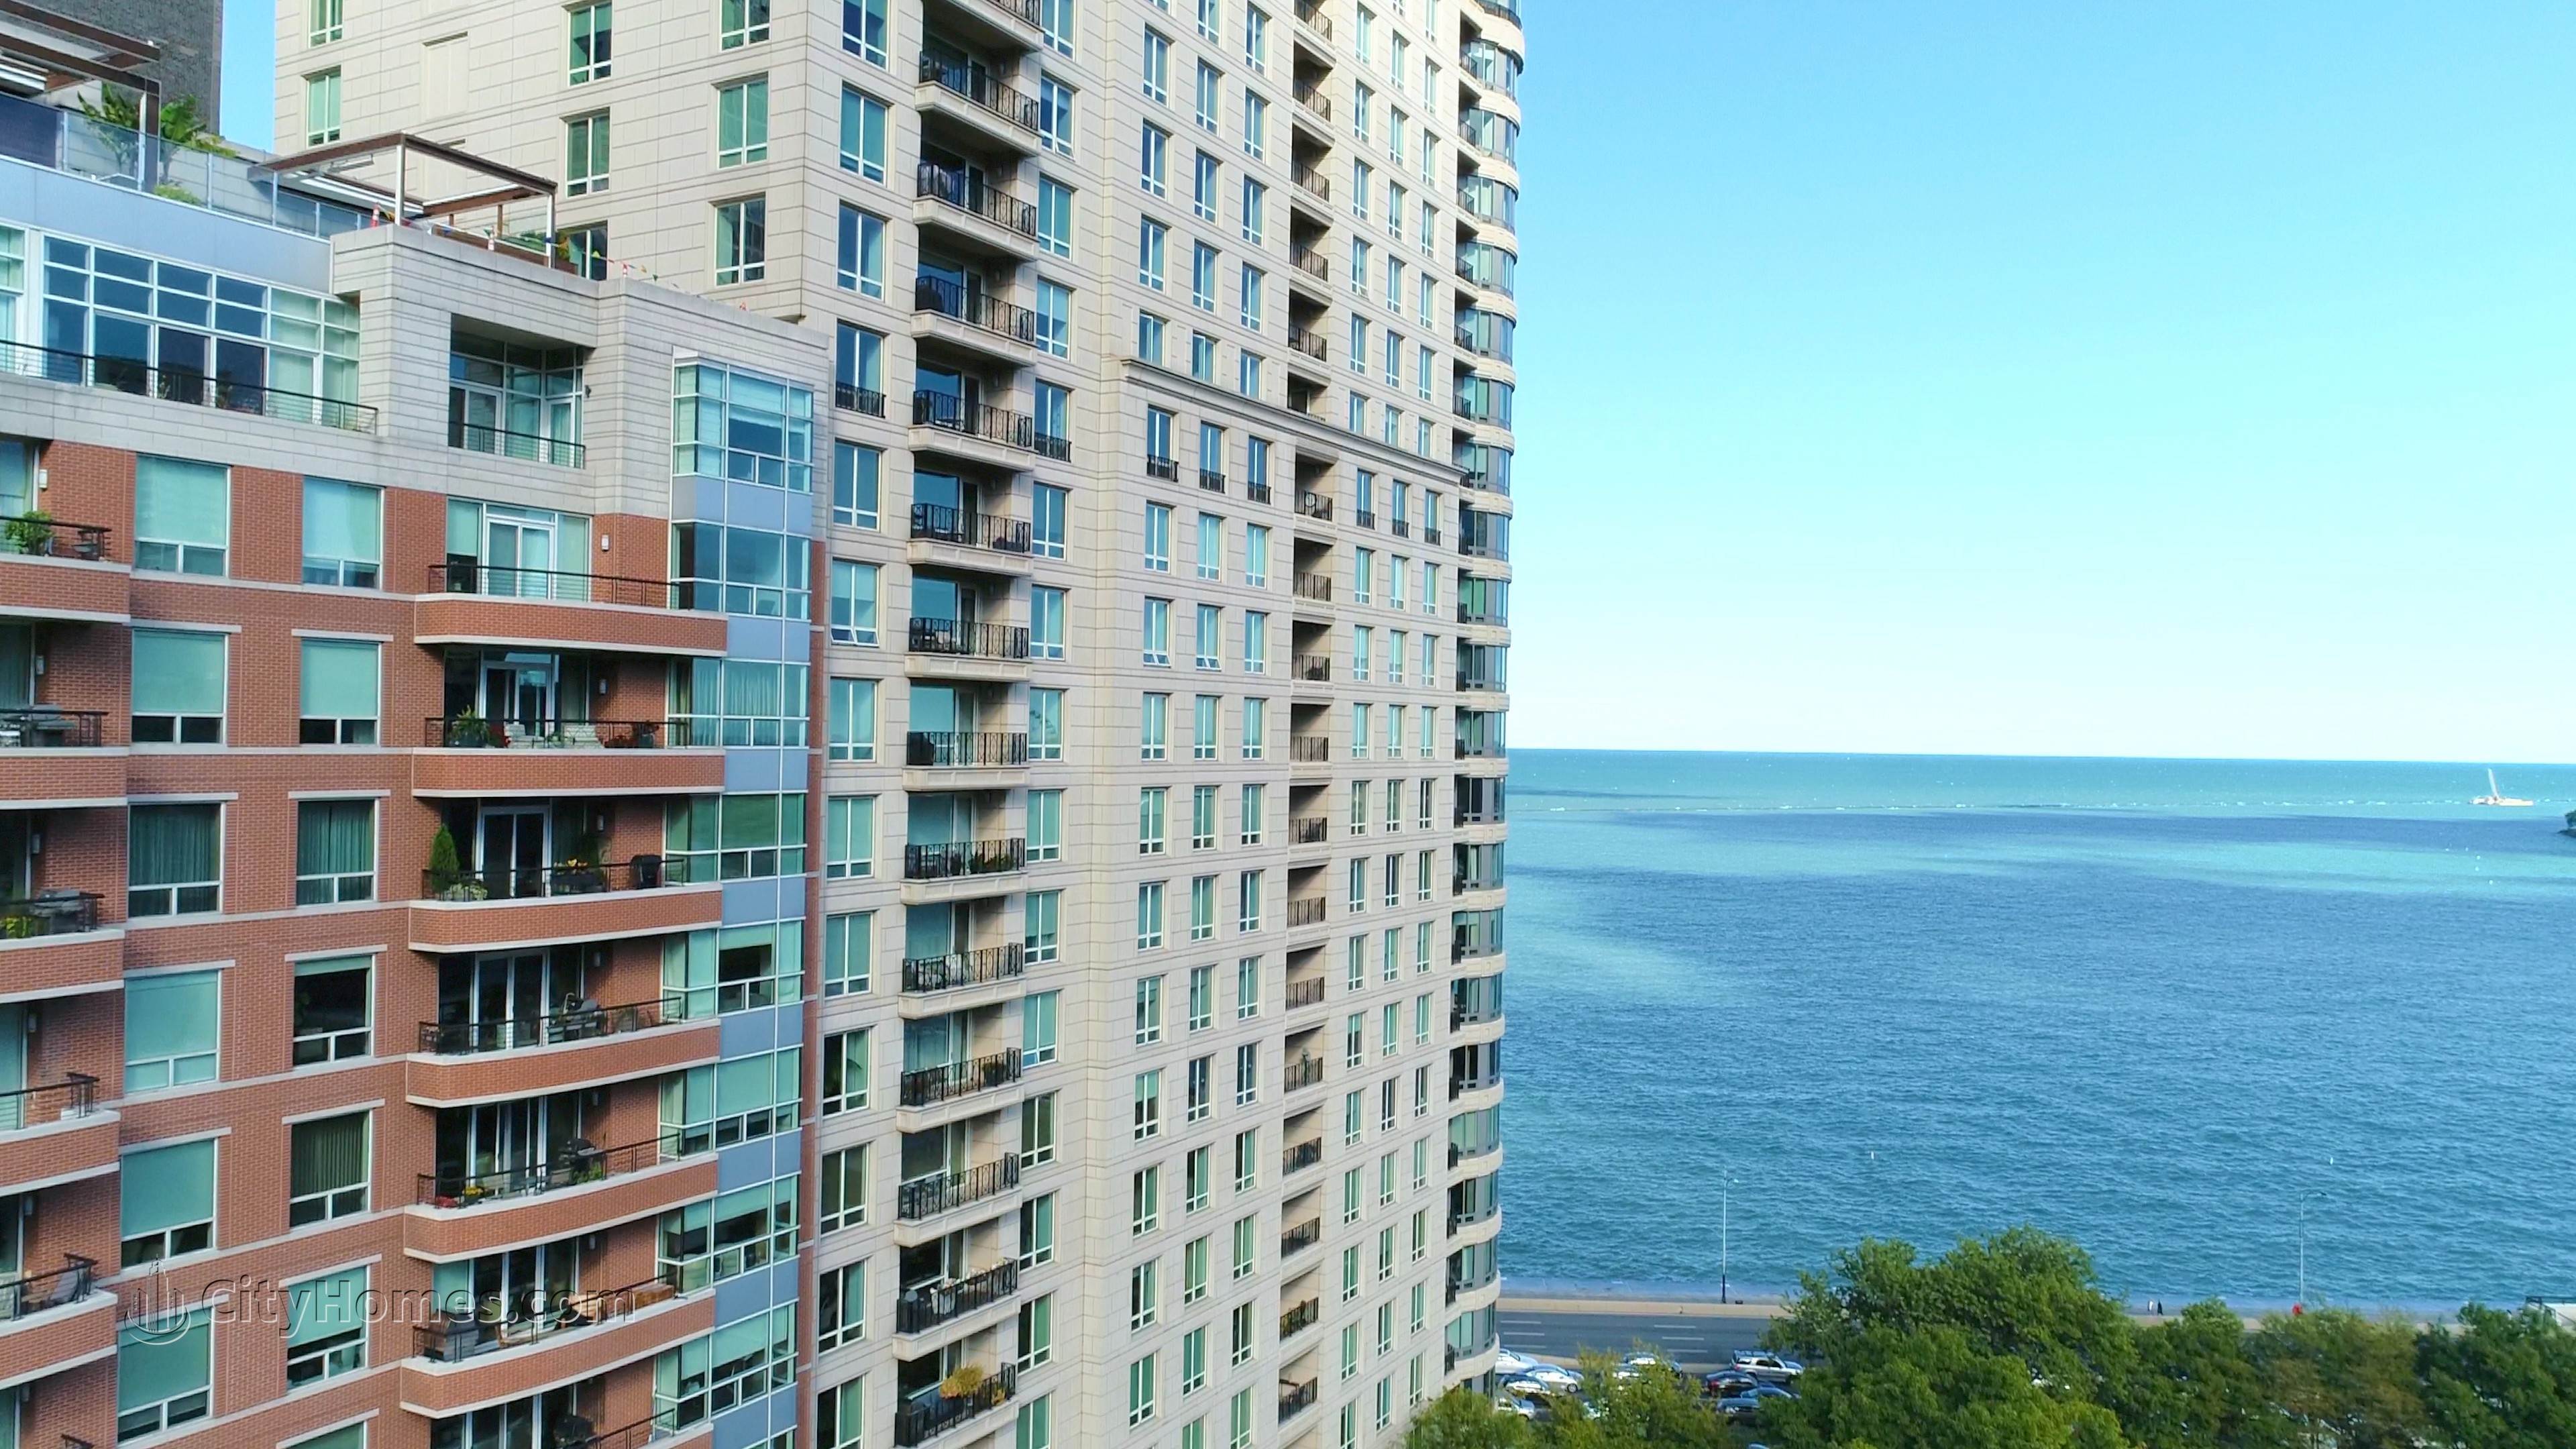 840 N Lake Shore Dr, Central Chicago, 시카고, IL 60611에 Residences of Lakeshore Park 건물